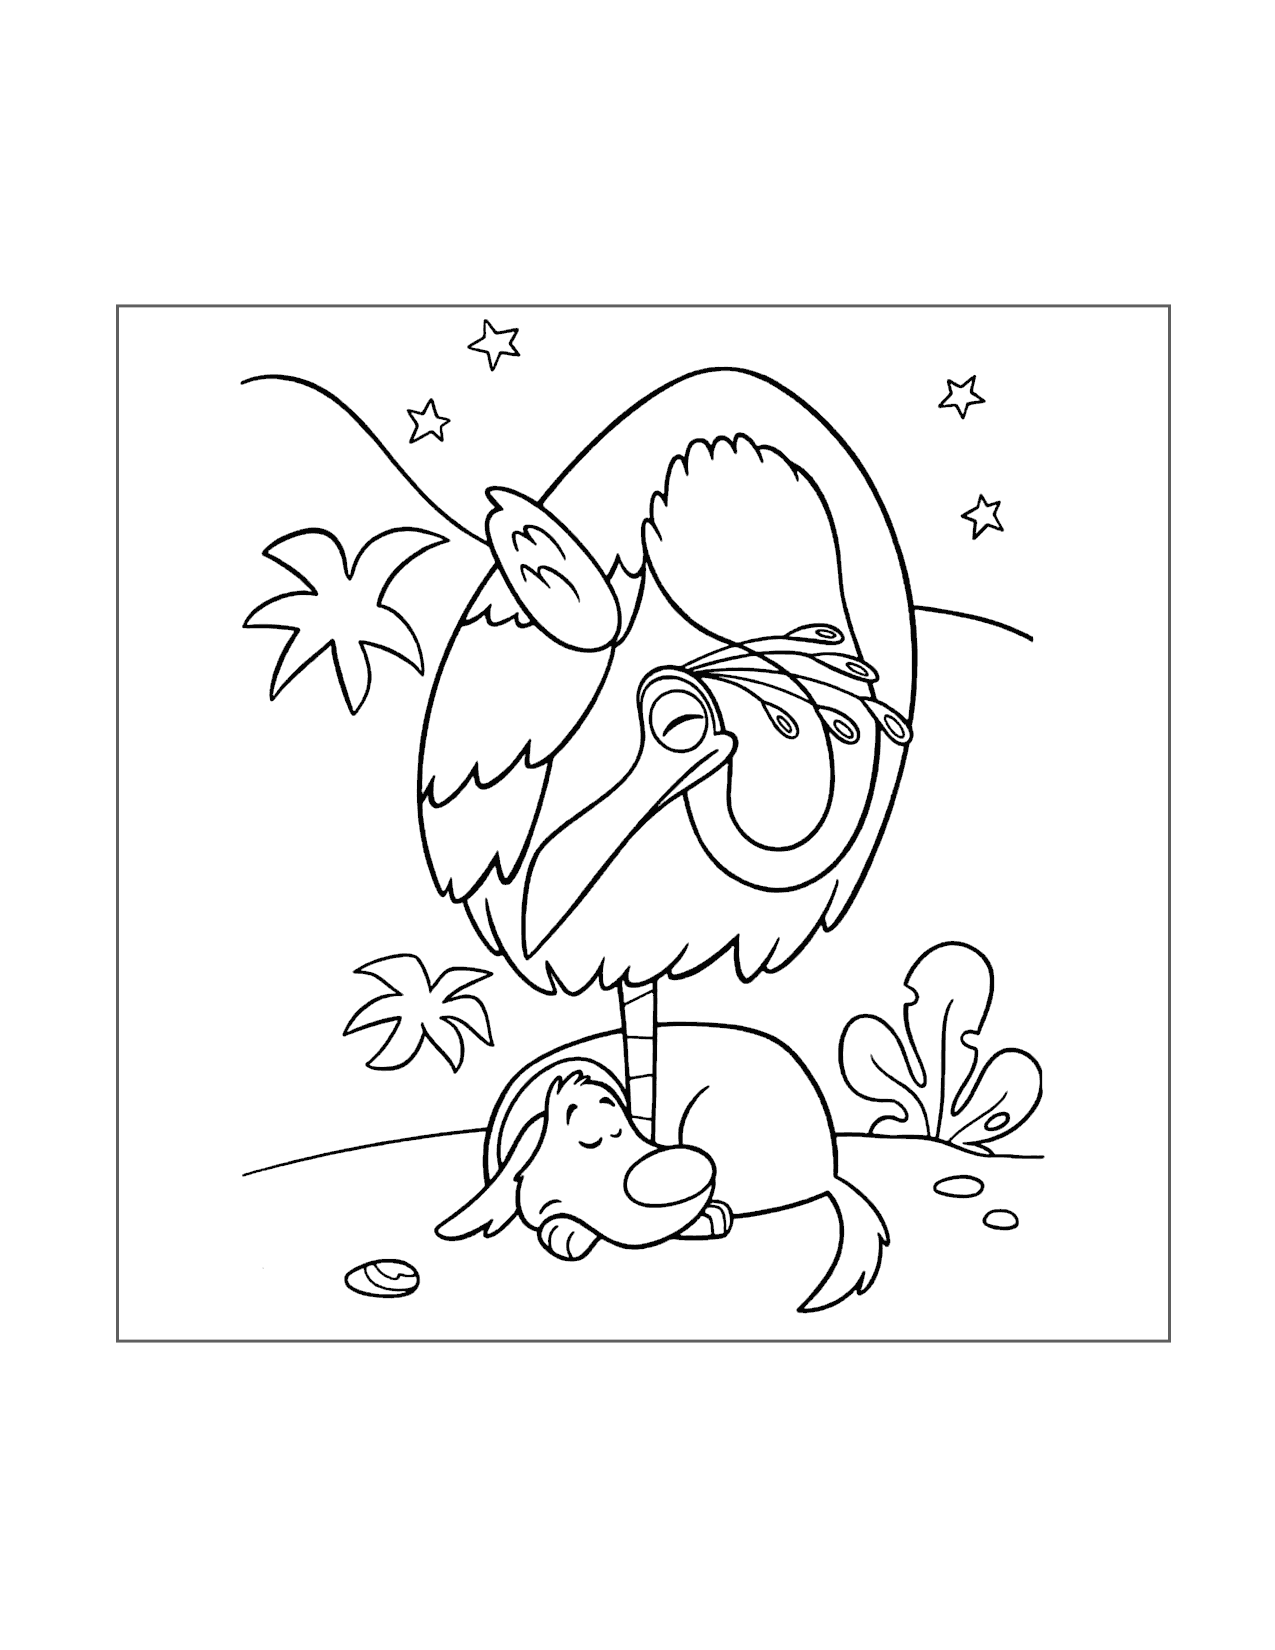 Dug And Kevin Sleep Up Coloring Page